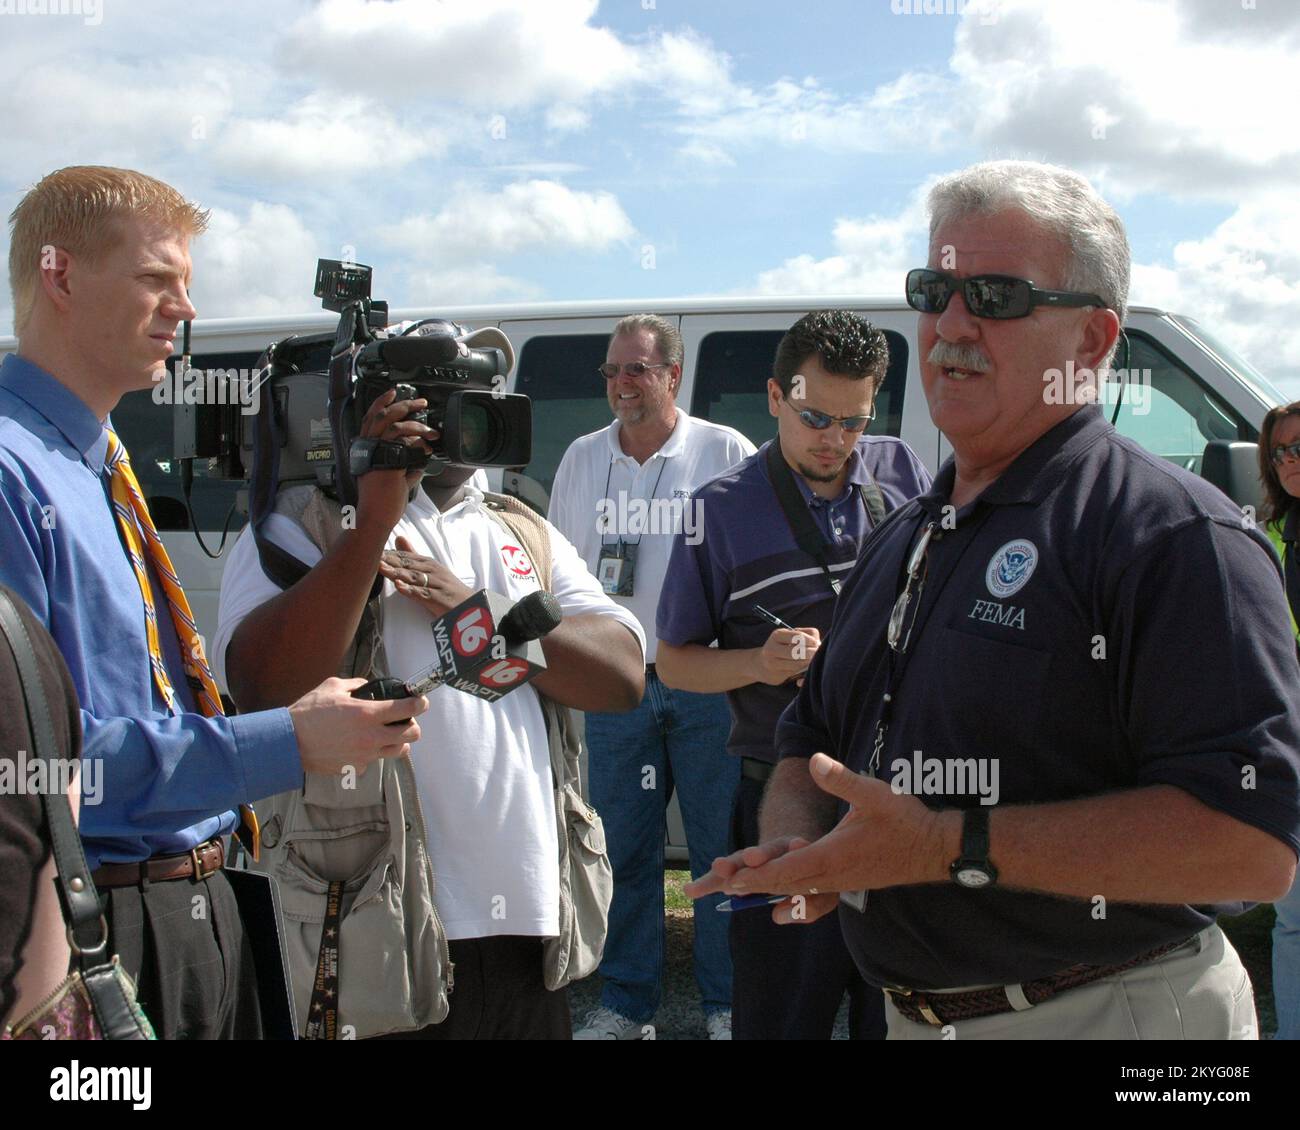 Hurricane Katrina, Purvis, MS., July 28, 2006 - Mike Miller, FEMA emergency housing unit supervisor, fields media questions at the travel trailer/mobile home staging area. Michelle Miller-Freeck/FEMA Stock Photo